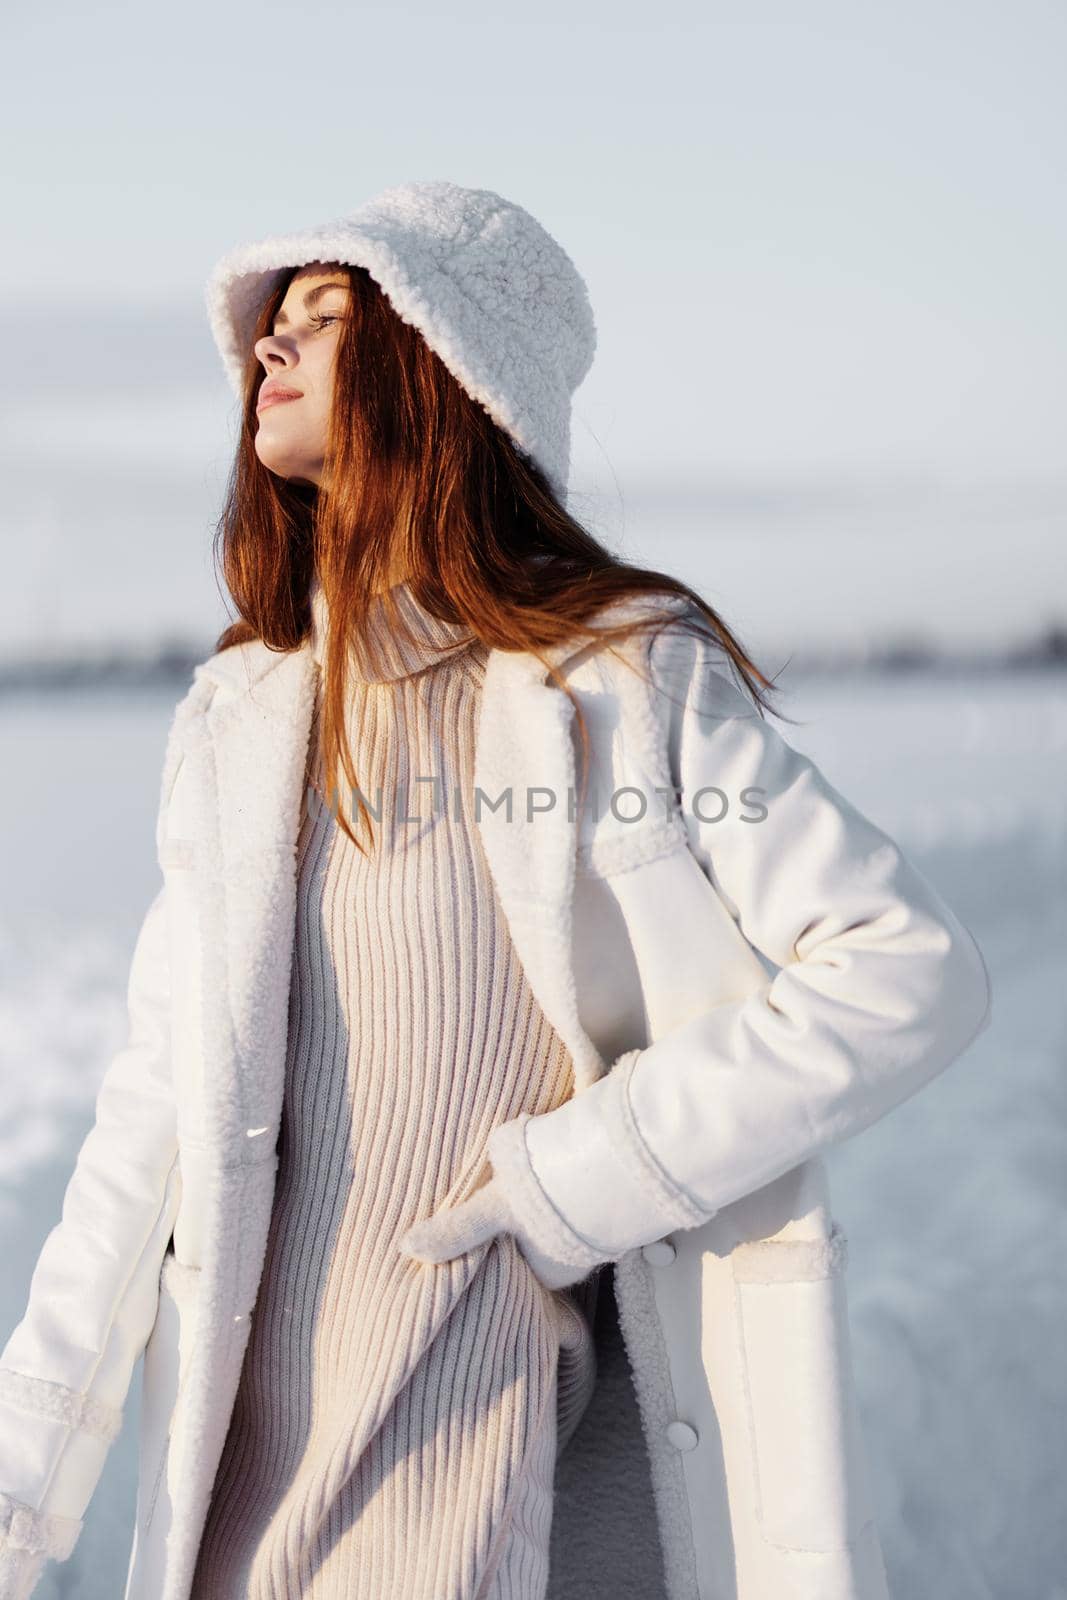 woman red hair snow field winter clothes nature. High quality photo